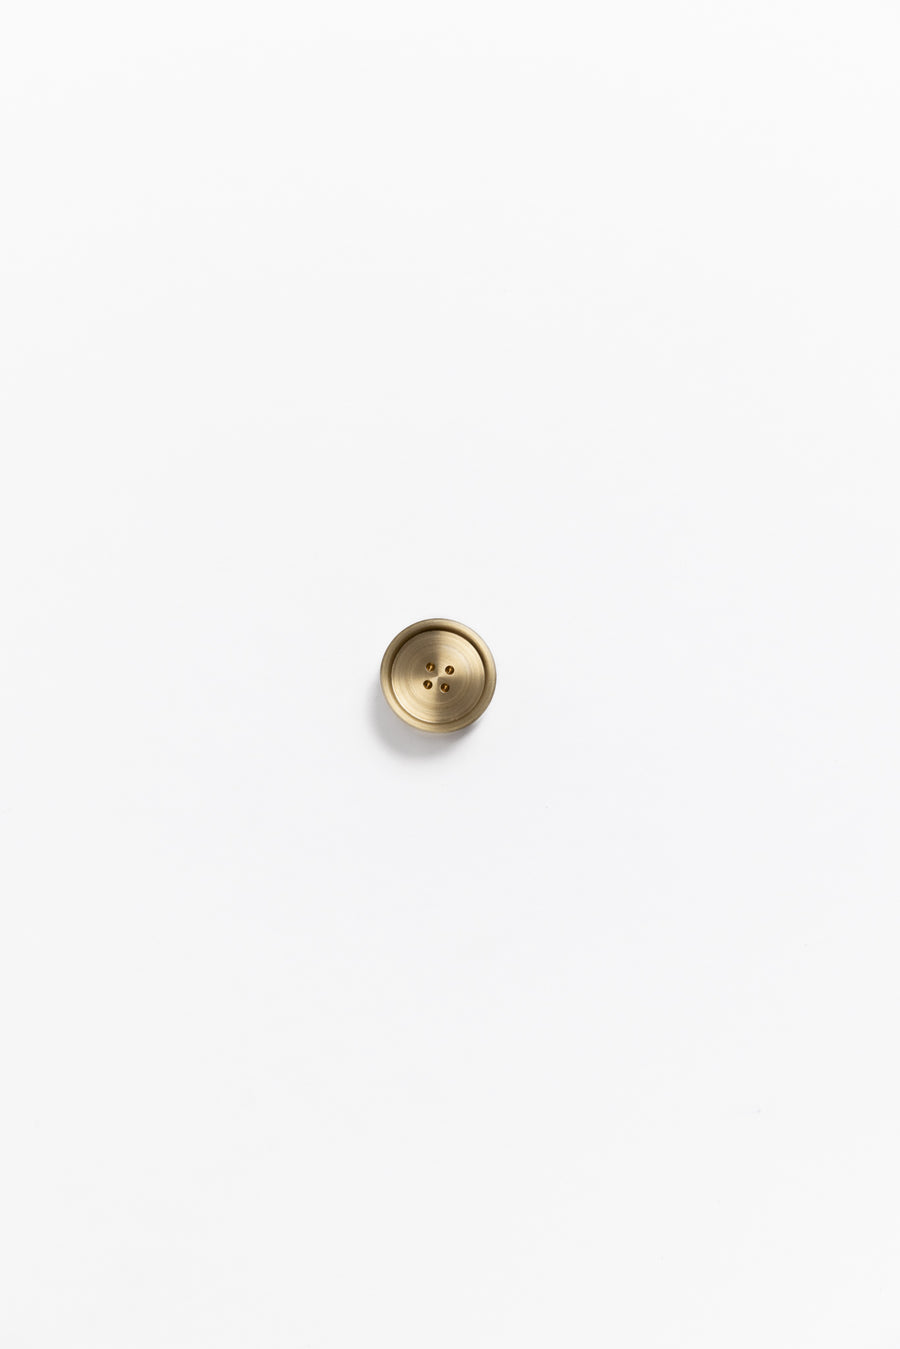 Angus Button Brass Cabinetry Knob - Little Swagger